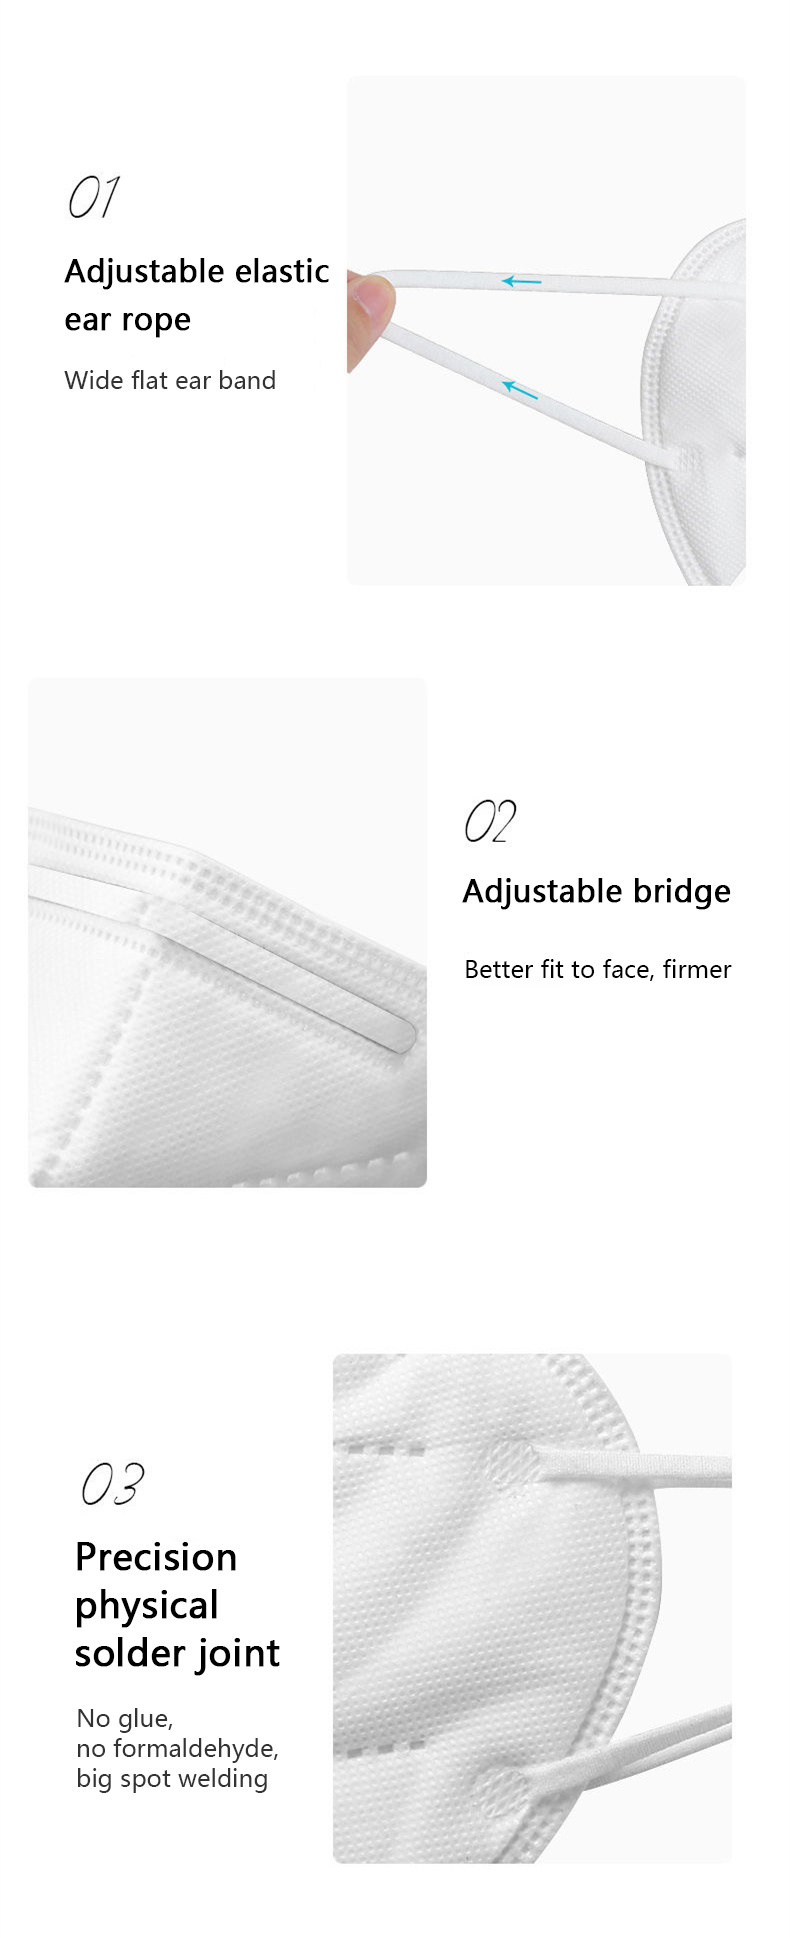 Face Mask/Wholesale Face Shield/FFP2/Type Iir/Five Layer Protective Mask/KN95 Face Mask